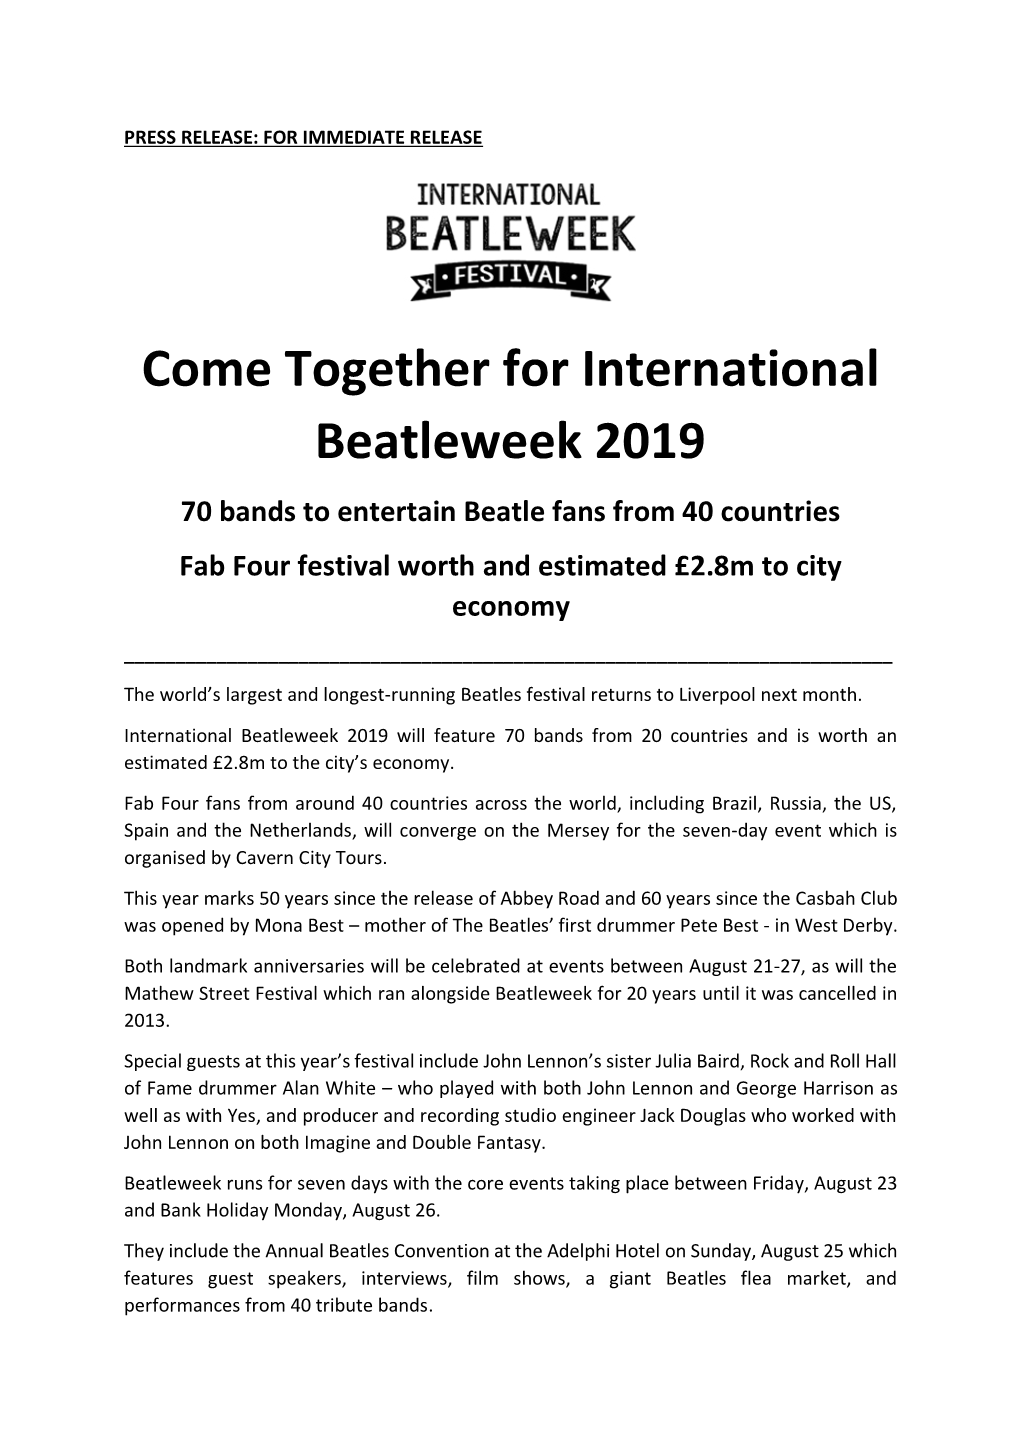 Come Together for International Beatleweek 2019 70 Bands to Entertain Beatle Fans from 40 Countries Fab Four Festival Worth and Estimated £2.8M to City Economy